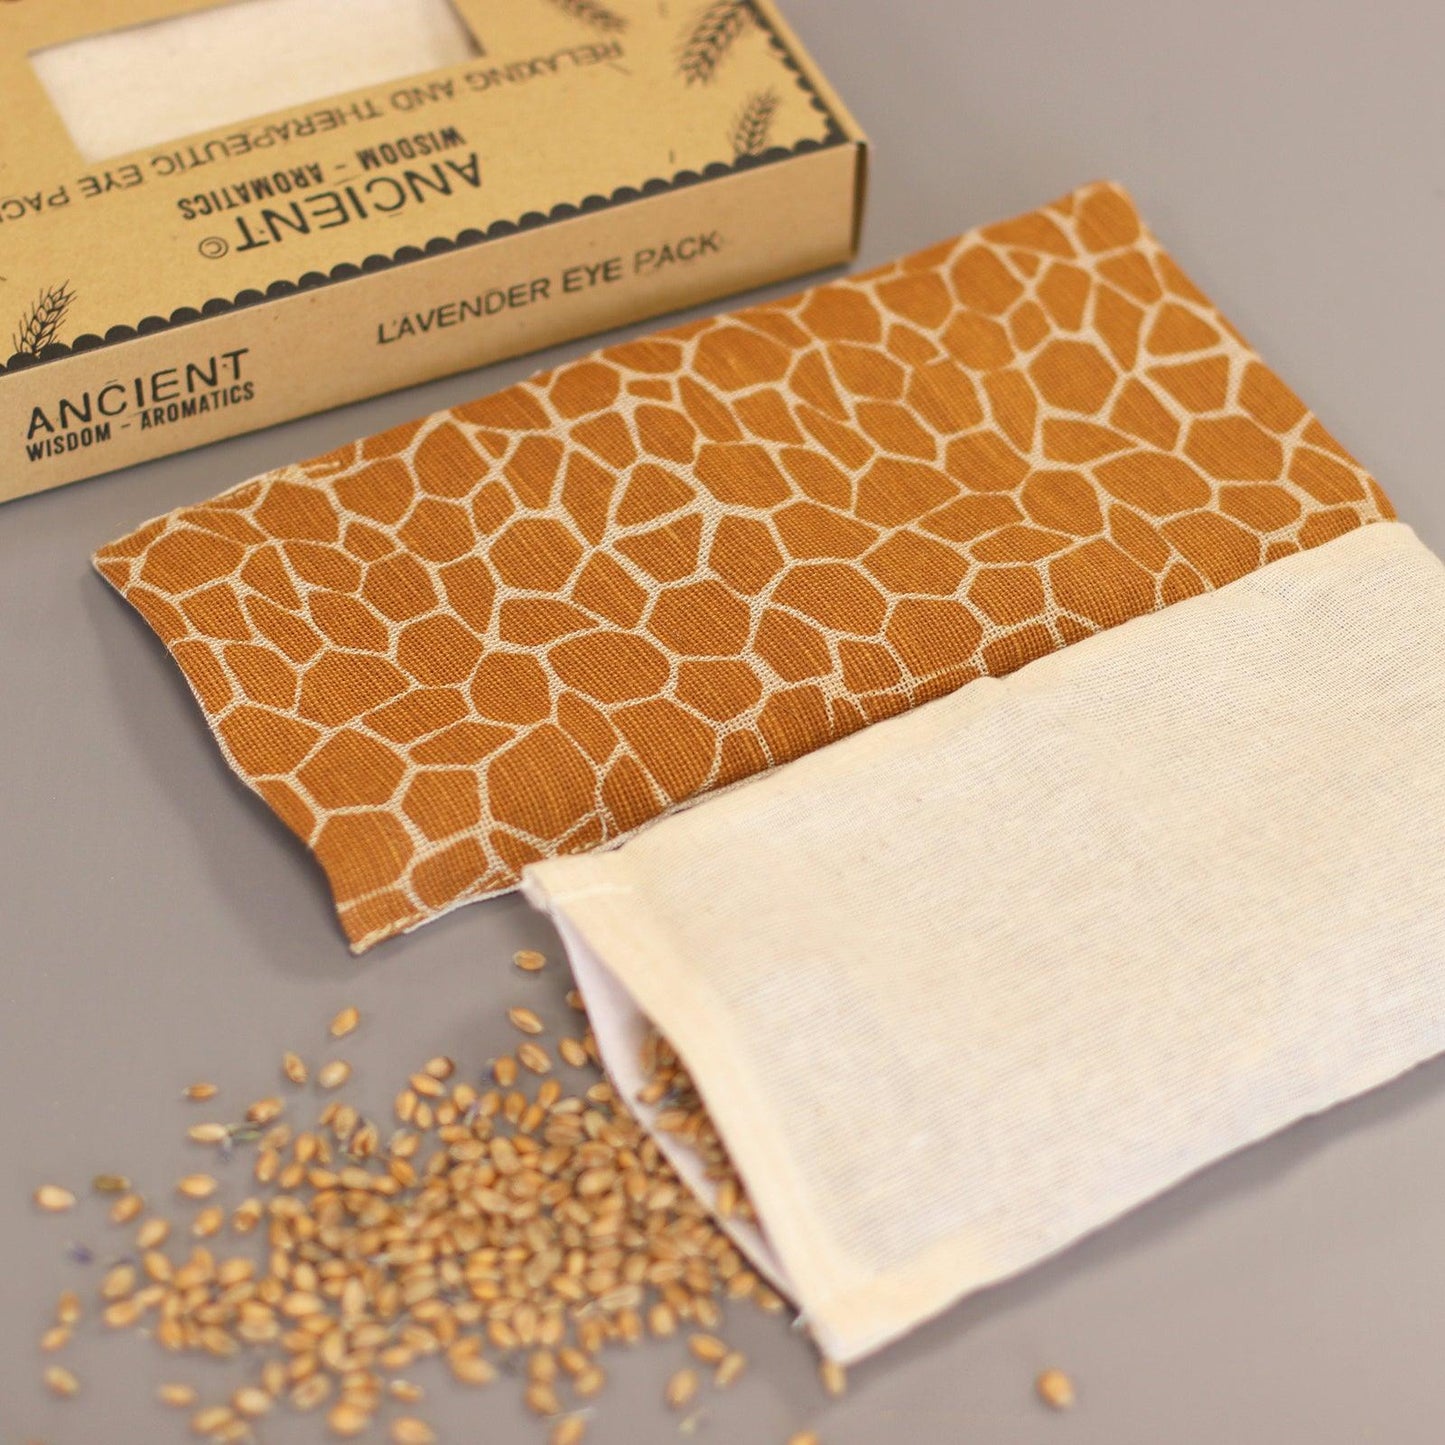 Lavender Natural Cotton and Juco Eye Pillow in Gift Box - Madagascar Giraffe - DuvetDay.co.uk